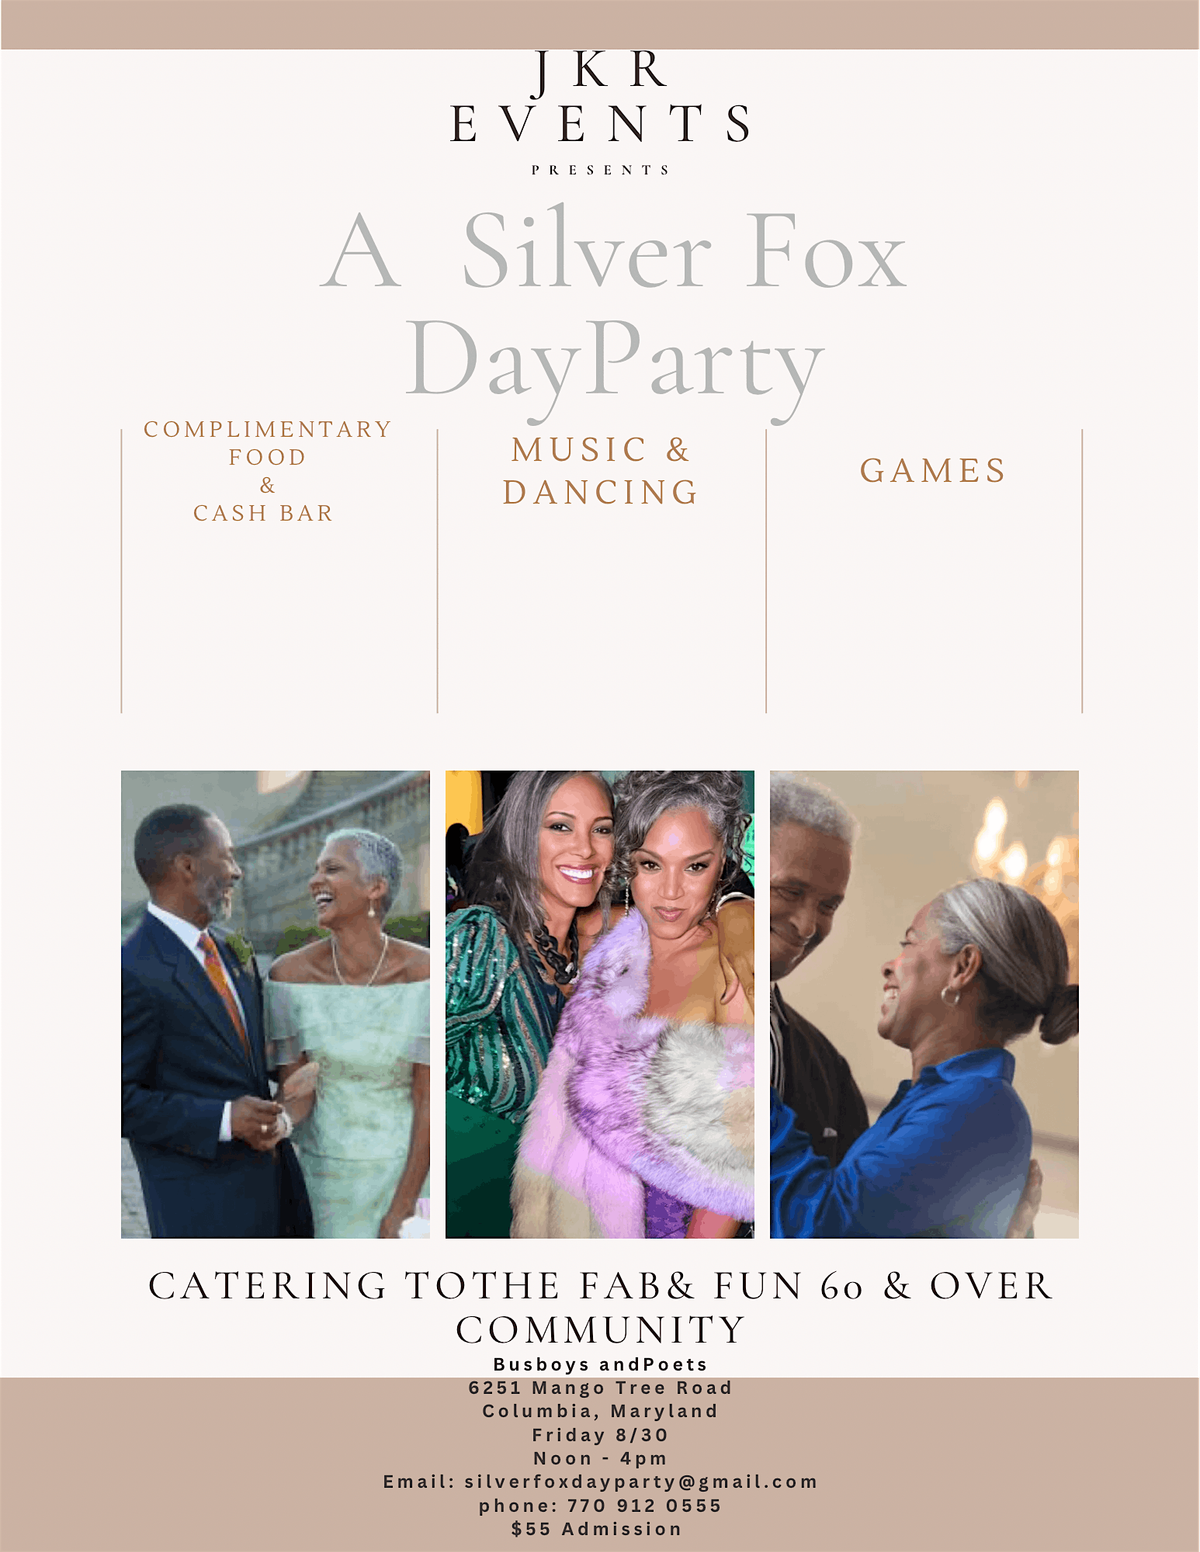 The Silver Fox Day Party